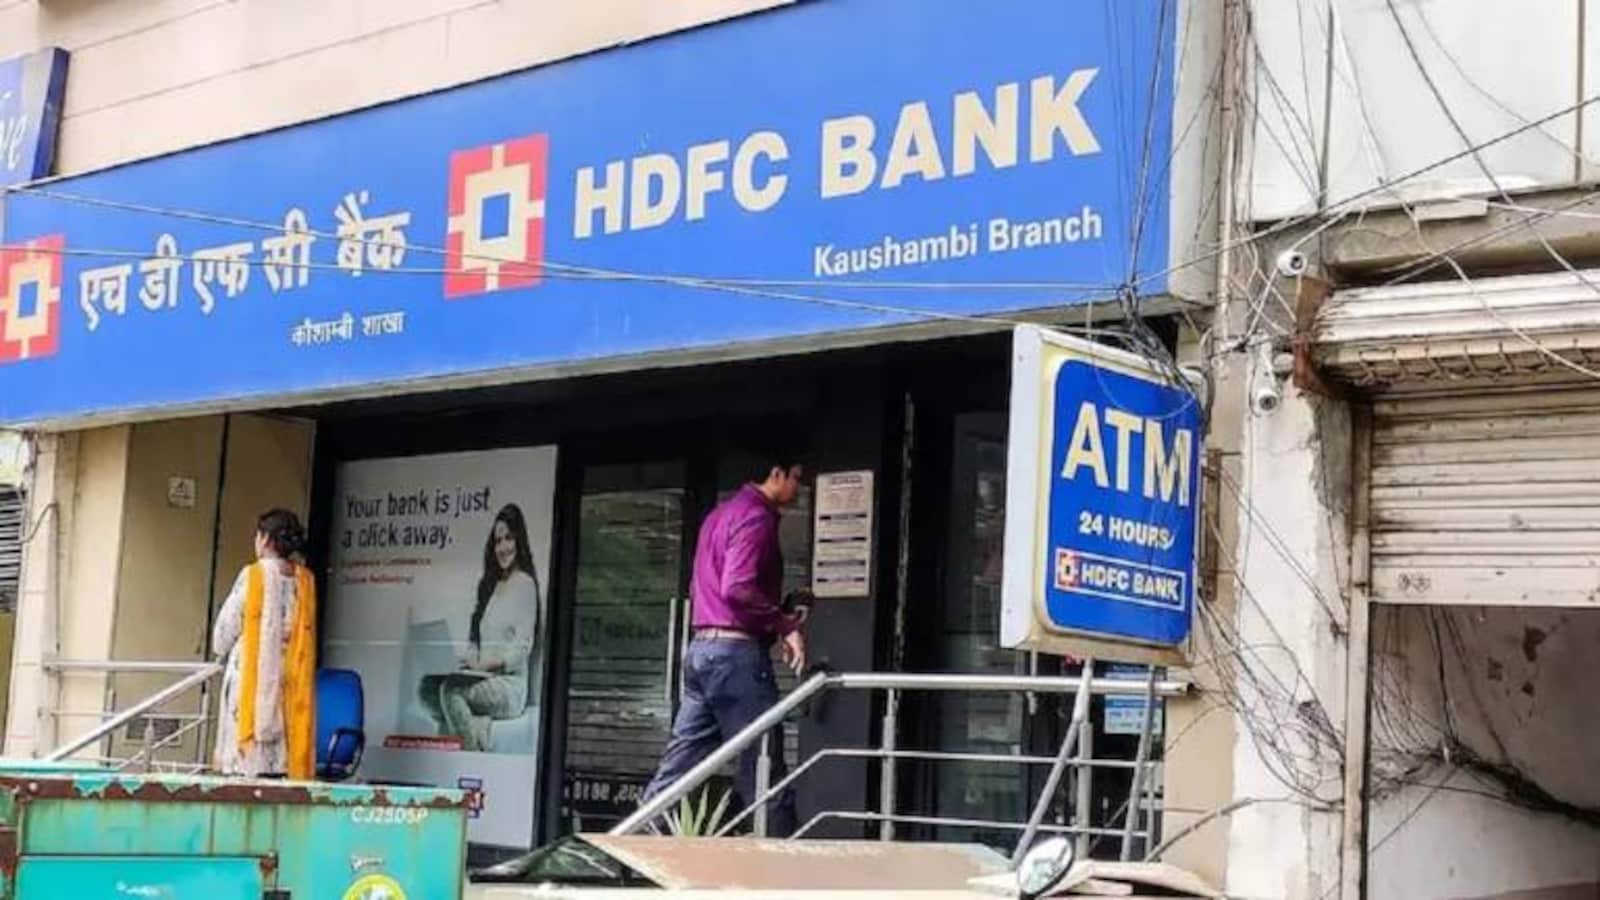 HDFC Bank Q3 Preview: Net profit expected to grow 14%, margins seen to be steady